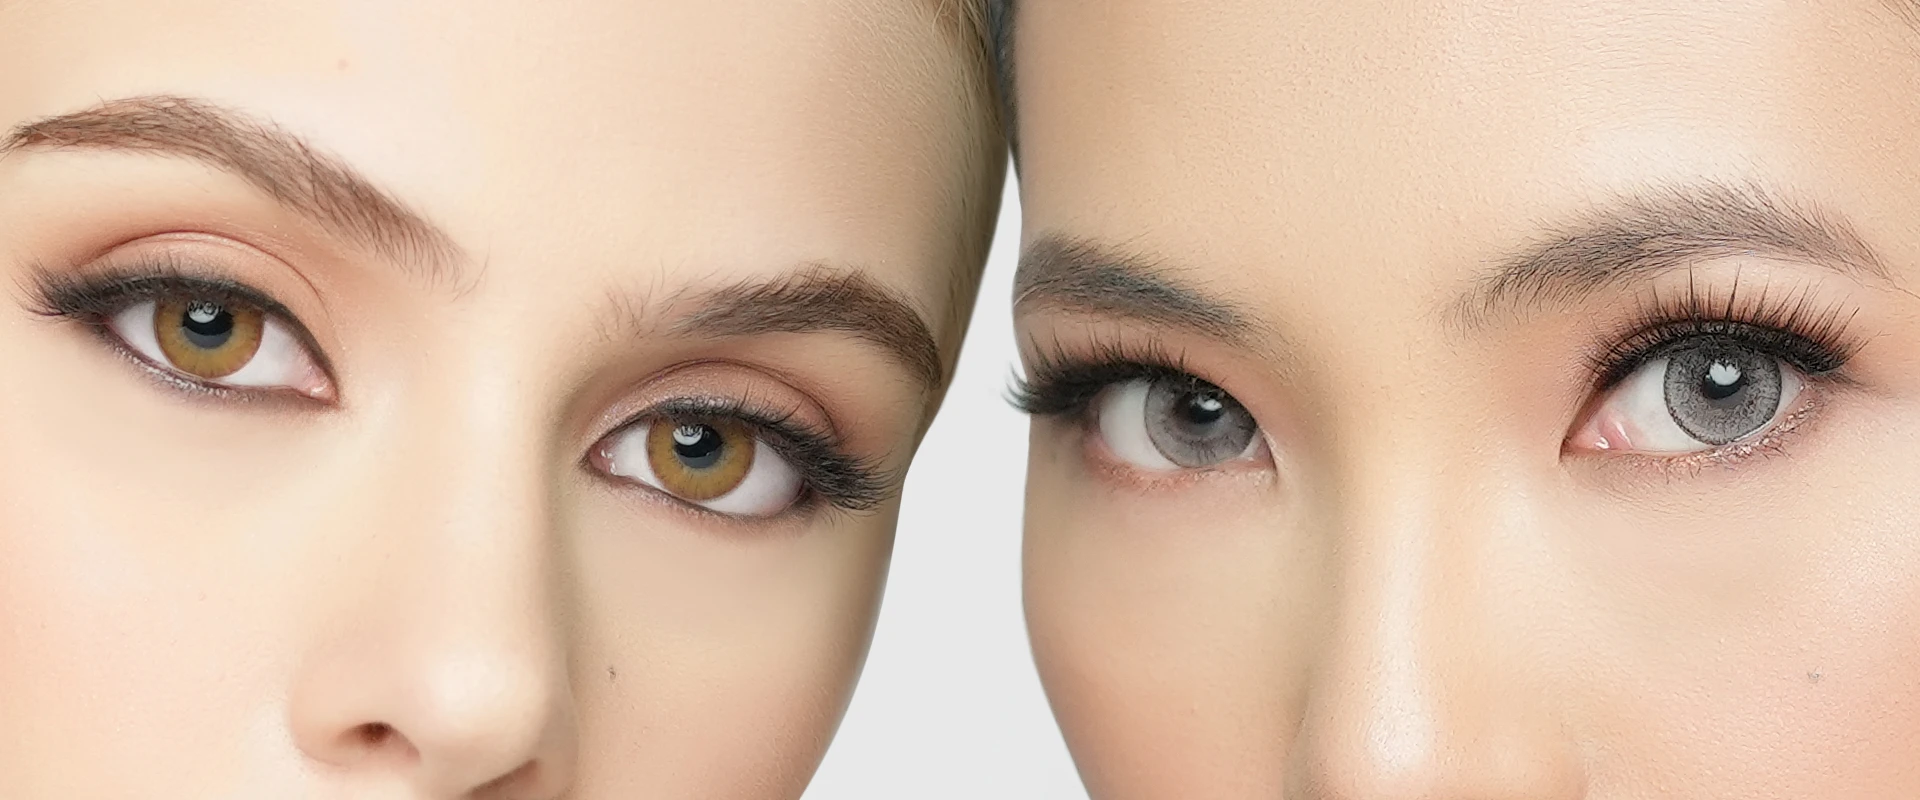 Close-up shots of two women wearing brown and gray colored contact lenses.